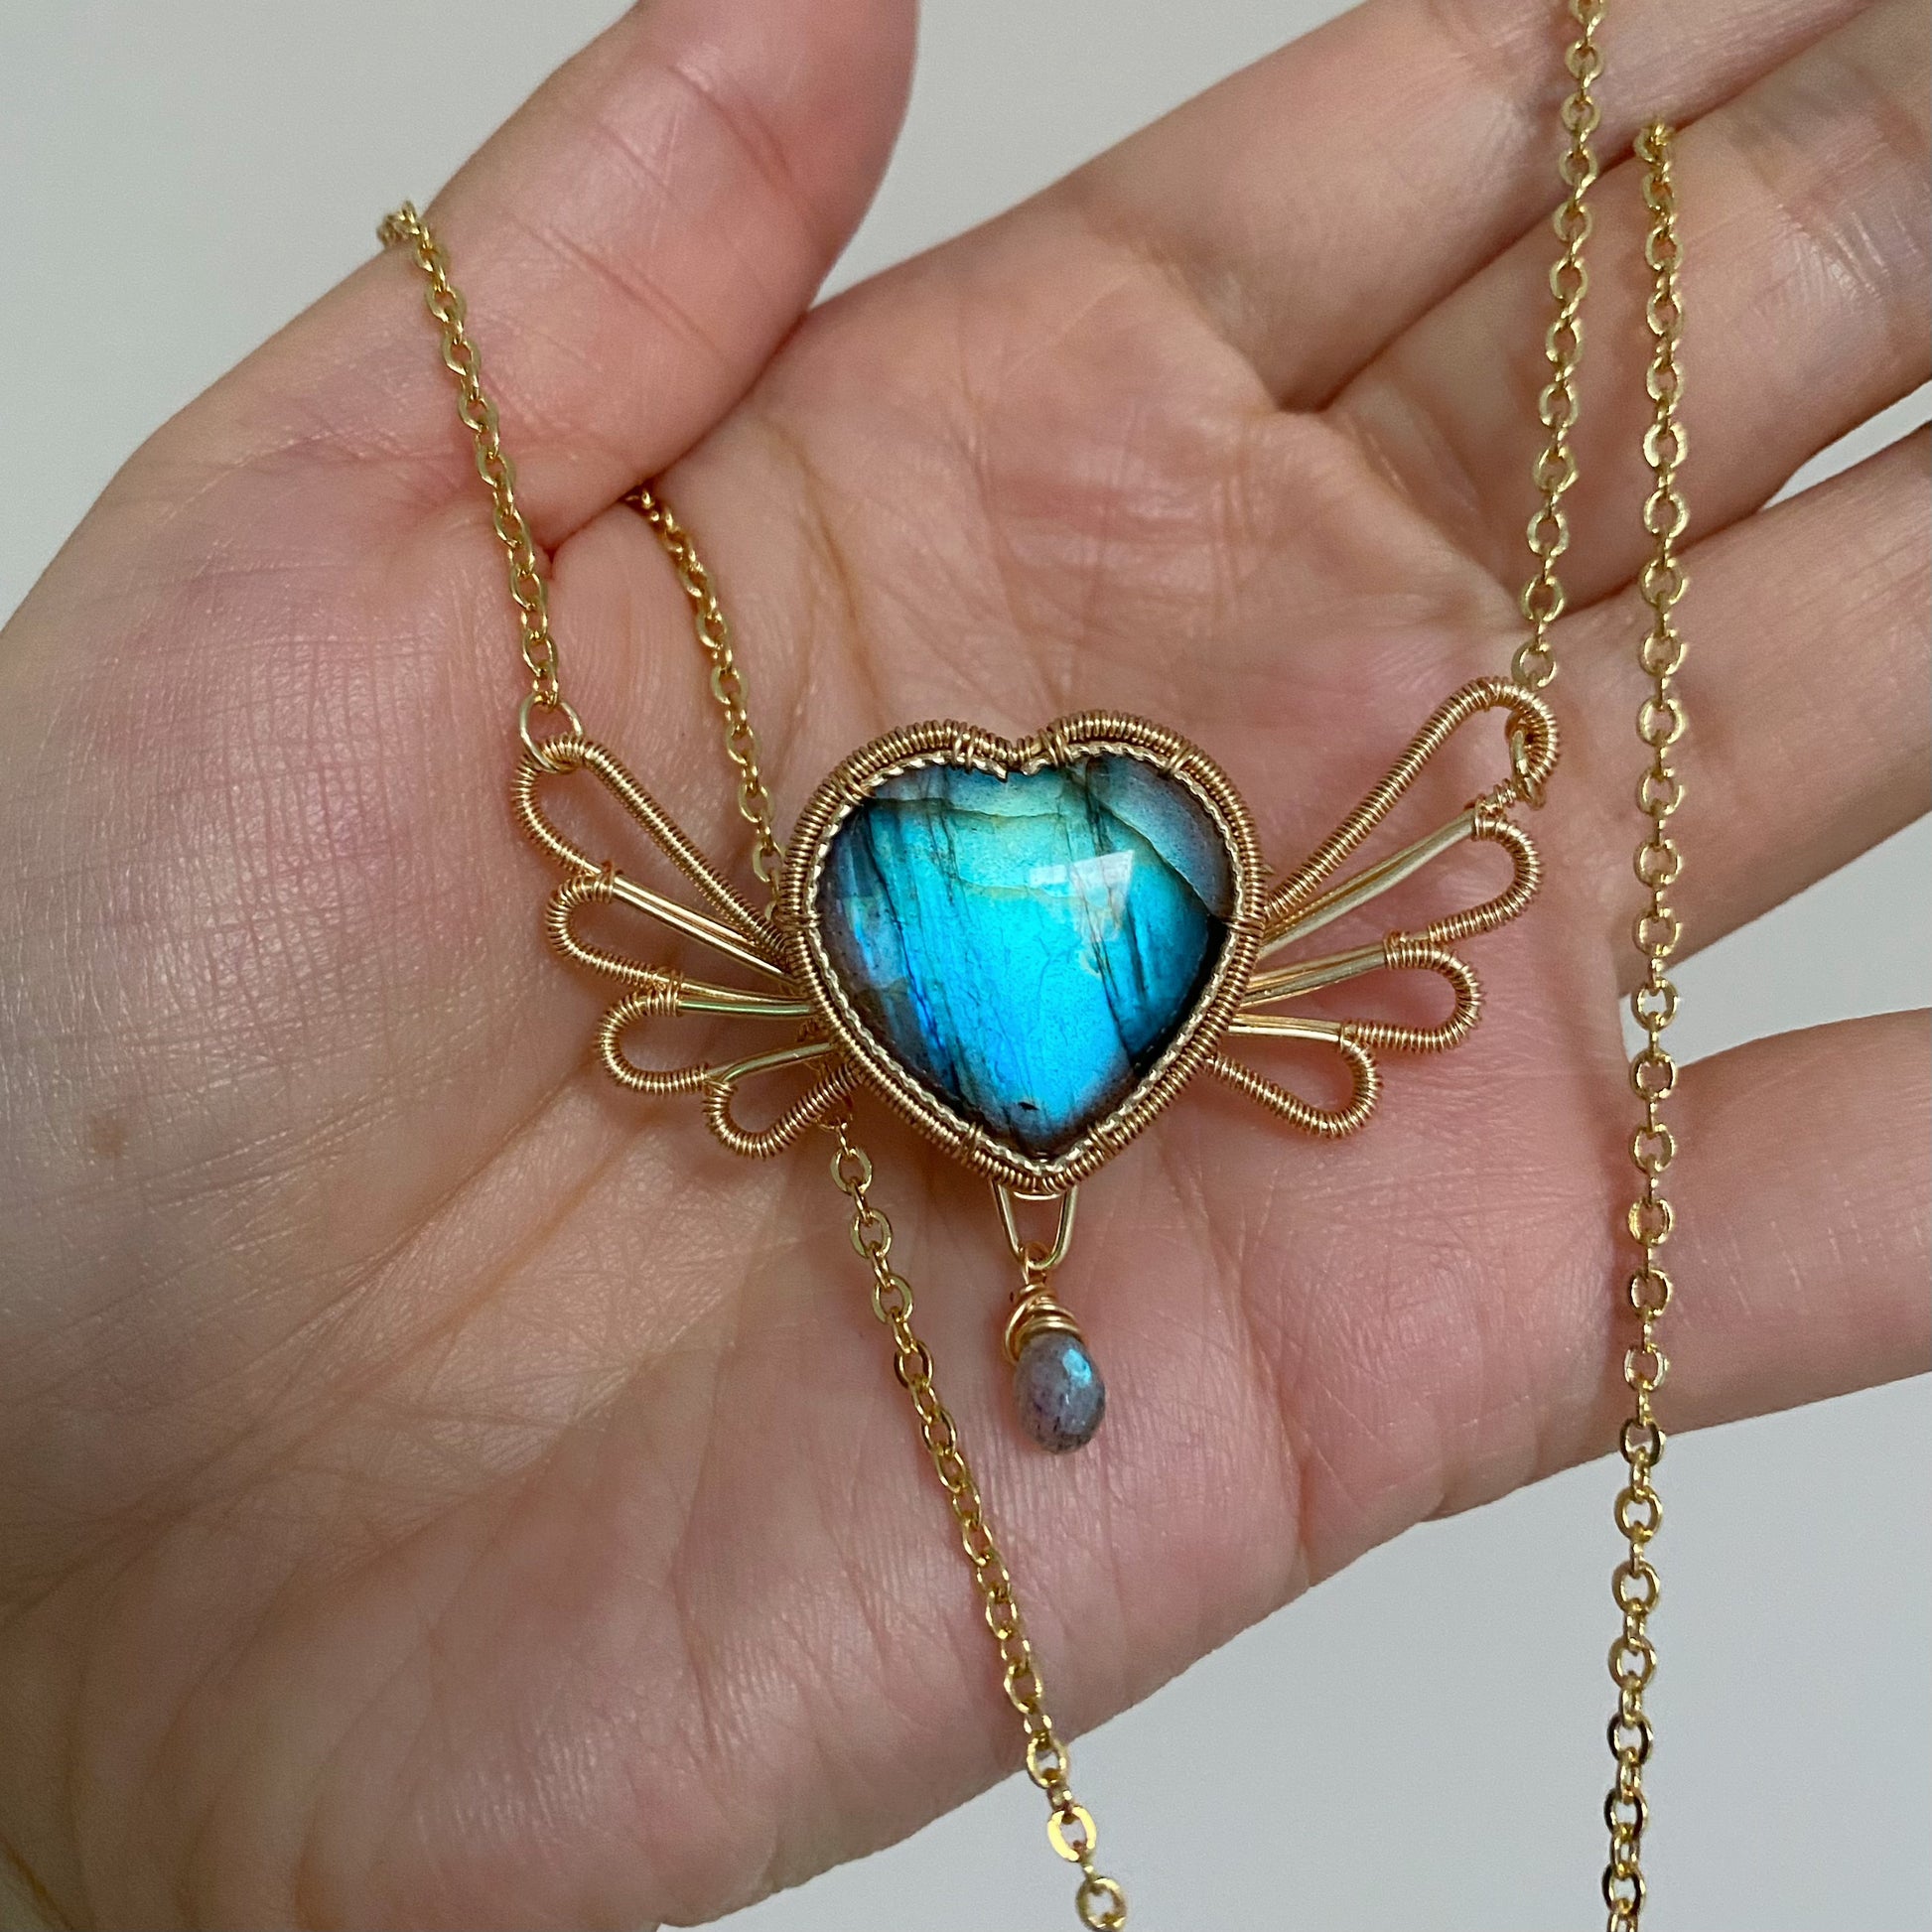 Handmade Heart Labradorite Necklace - Wire Wrapped Jewelry